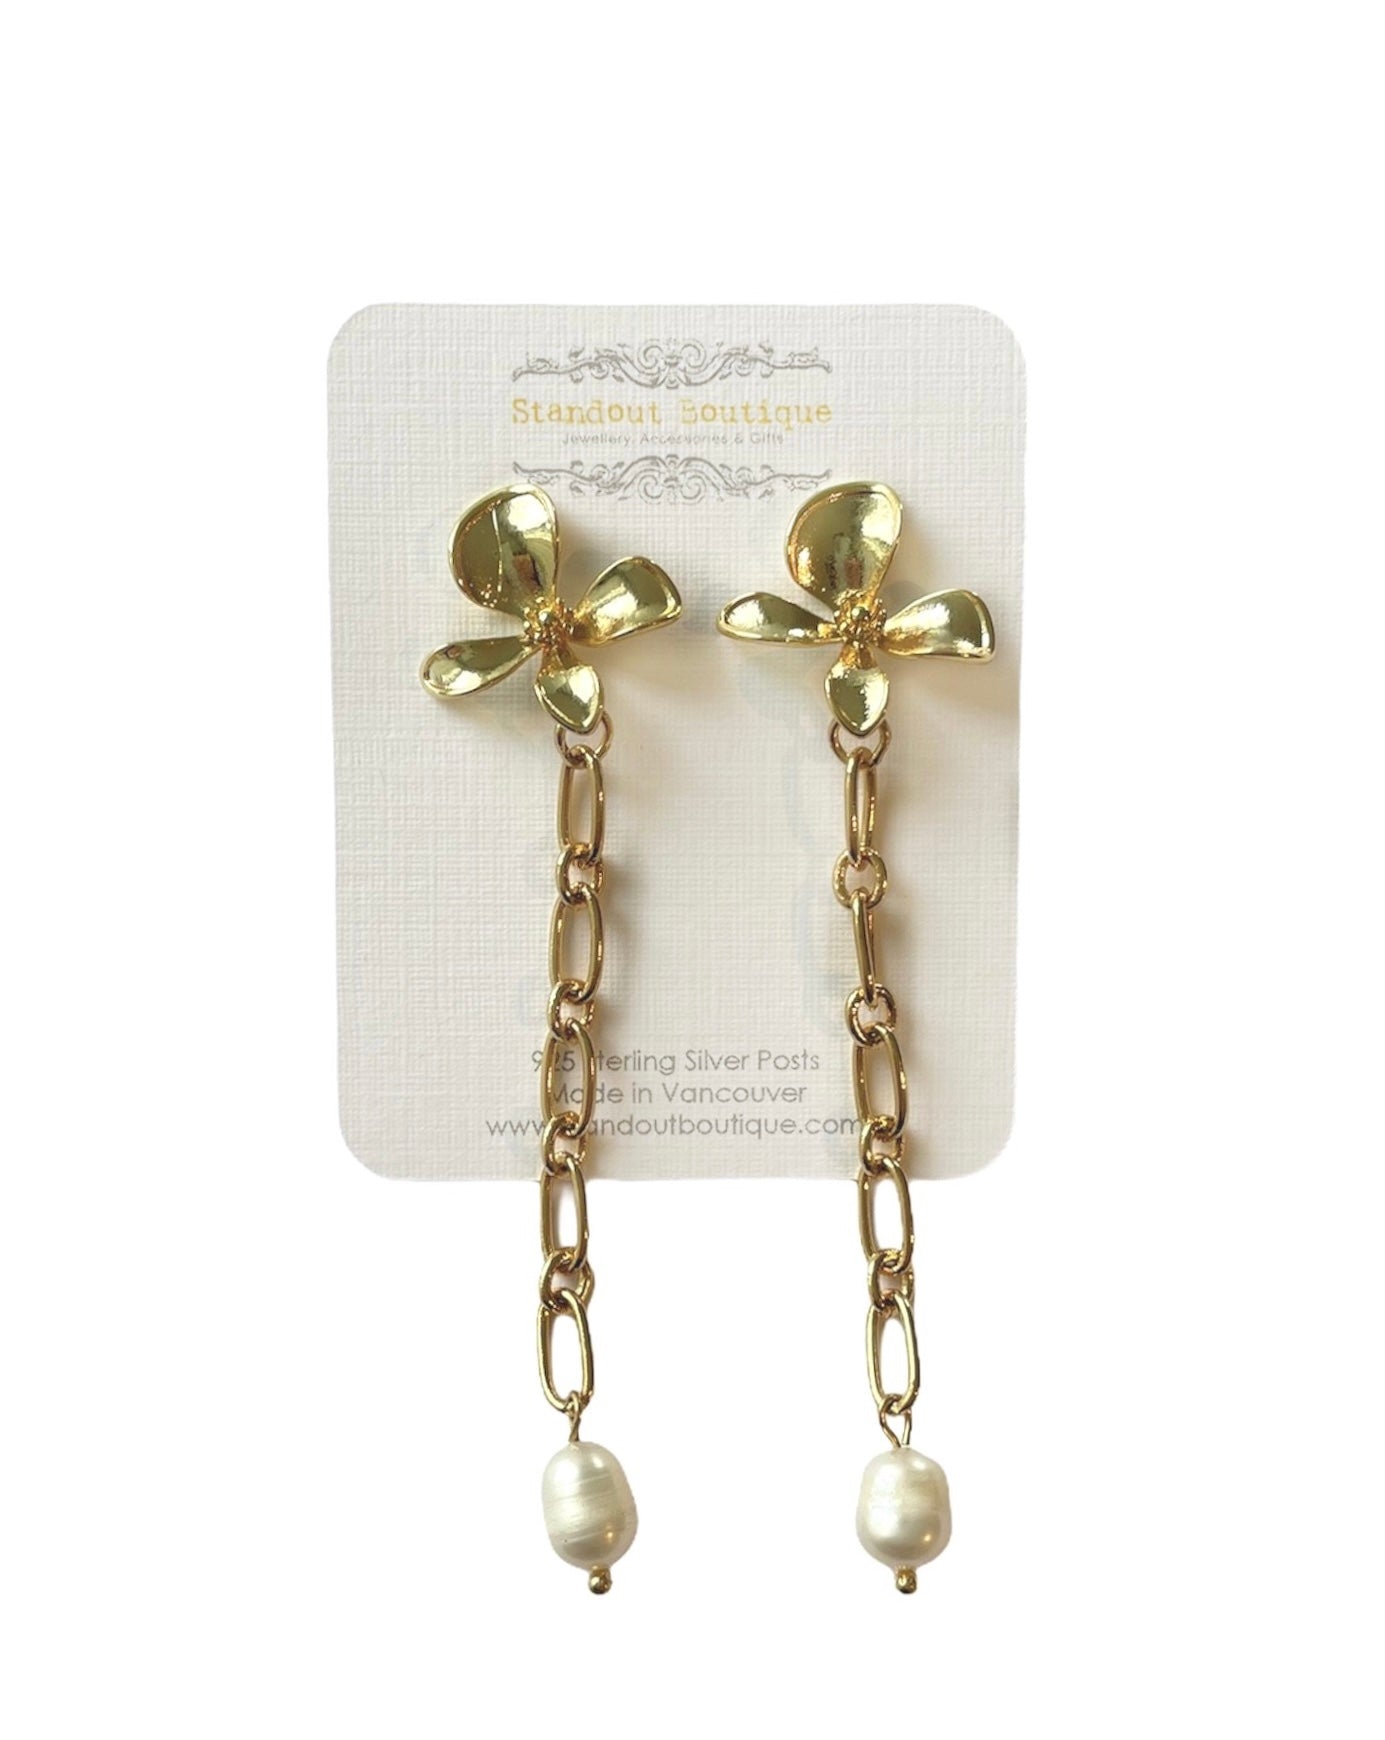 3 inch link chain drop earrings with freshwater pearls and a gold plated flower design